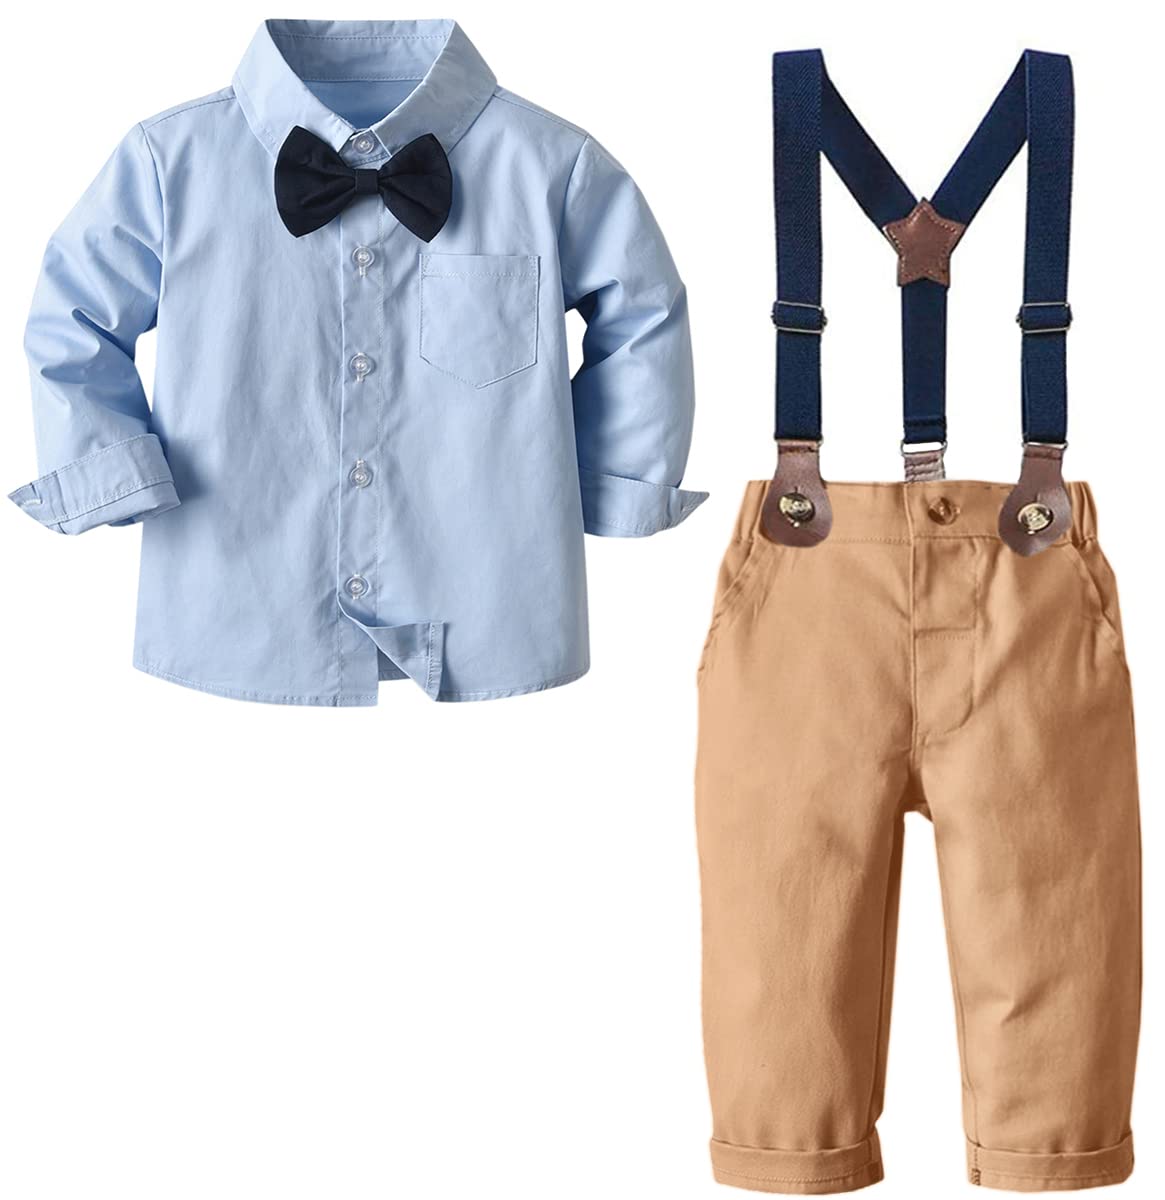 SANgTREE Baby Boys clothes, Long Sleeves Dress Shirt and Suspender Khaki Pants Set Tuxedo gentlemen Outfit with Bow Tie 